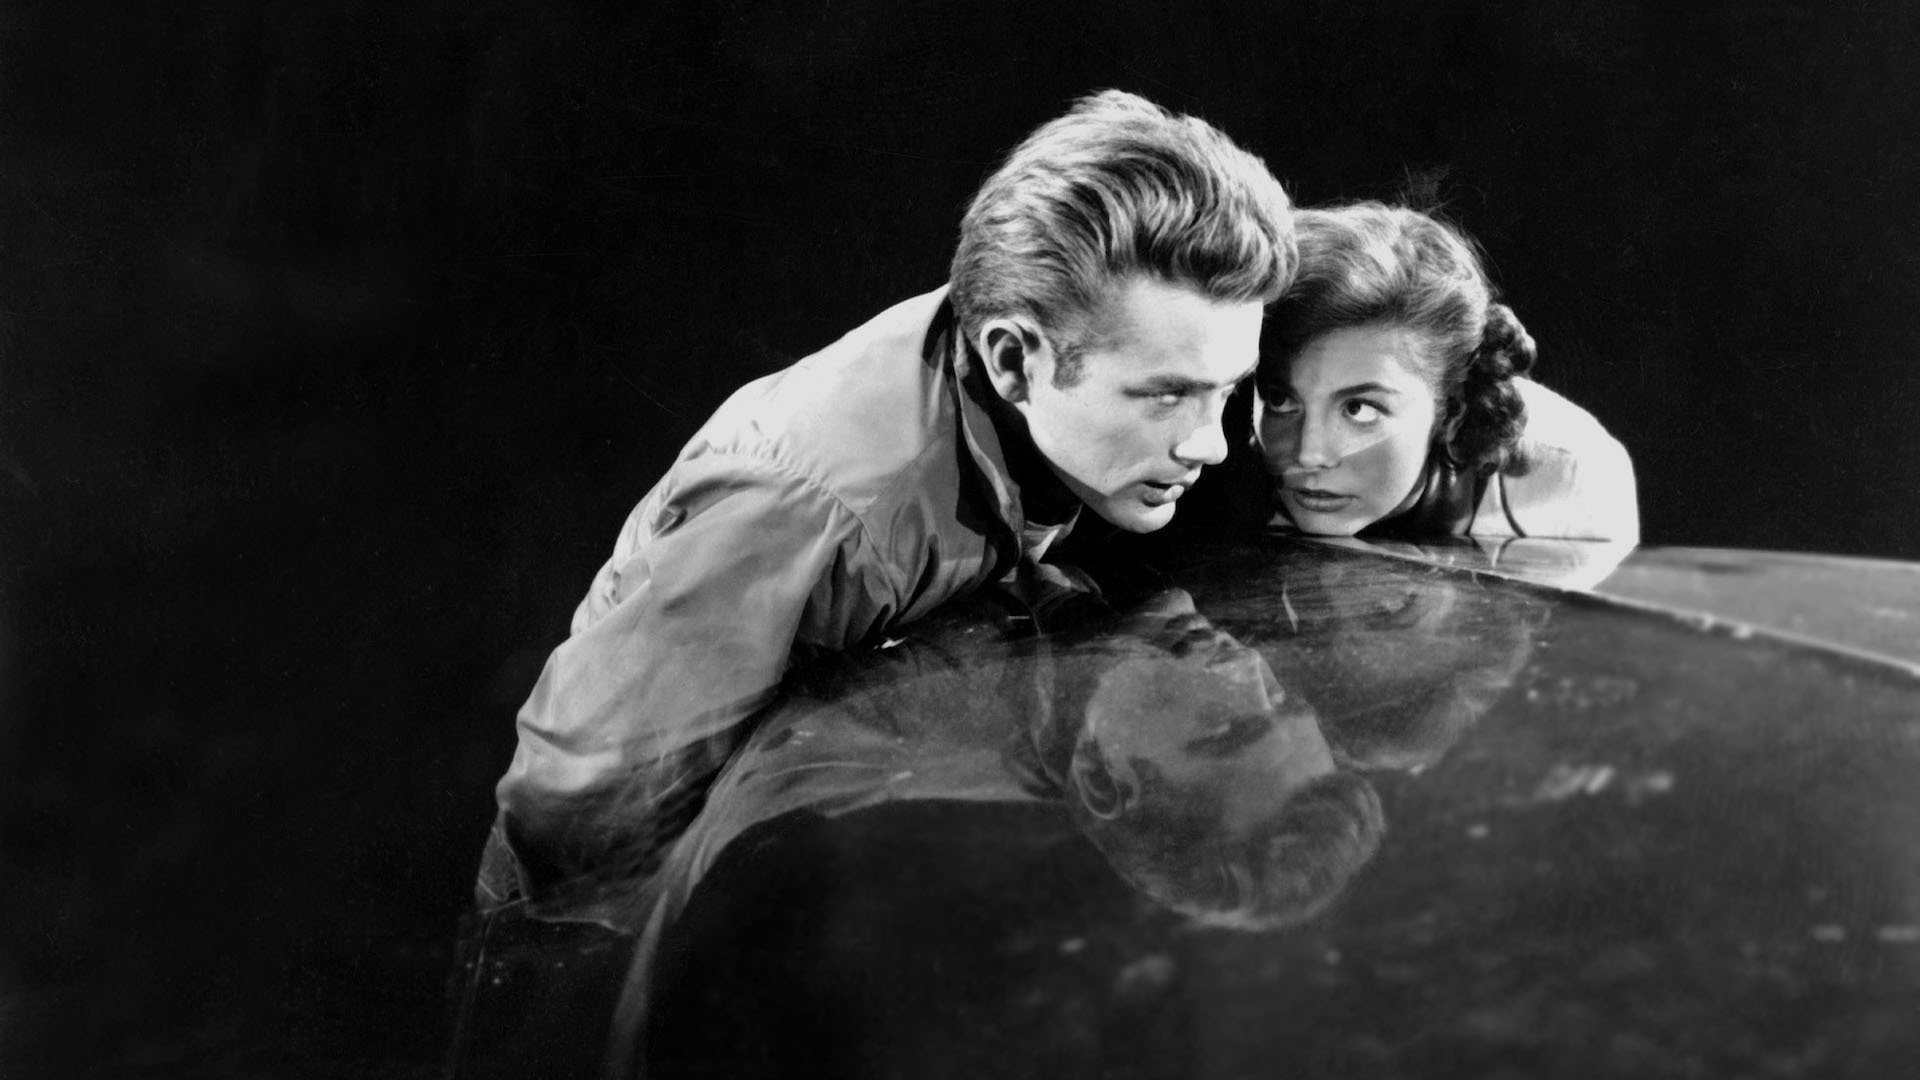 James Dean and Natalie Wood huddle together on the bonnet of a car in the film 